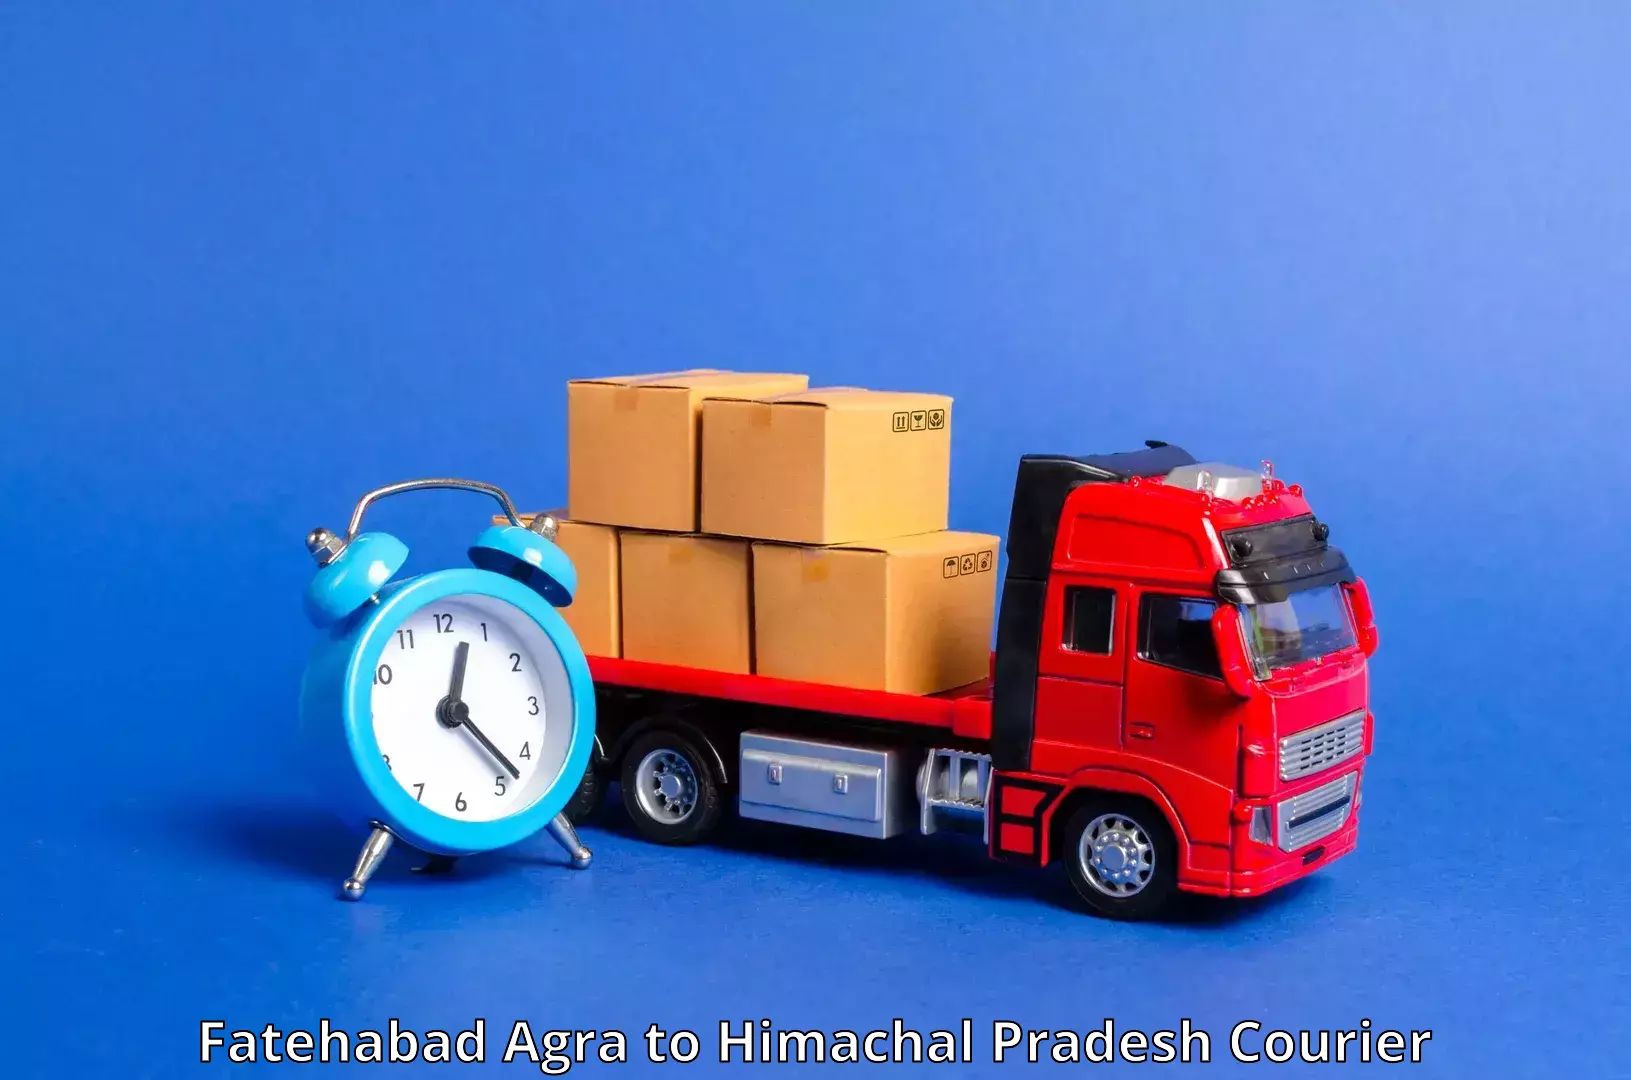 Express mail service Fatehabad Agra to Rehan